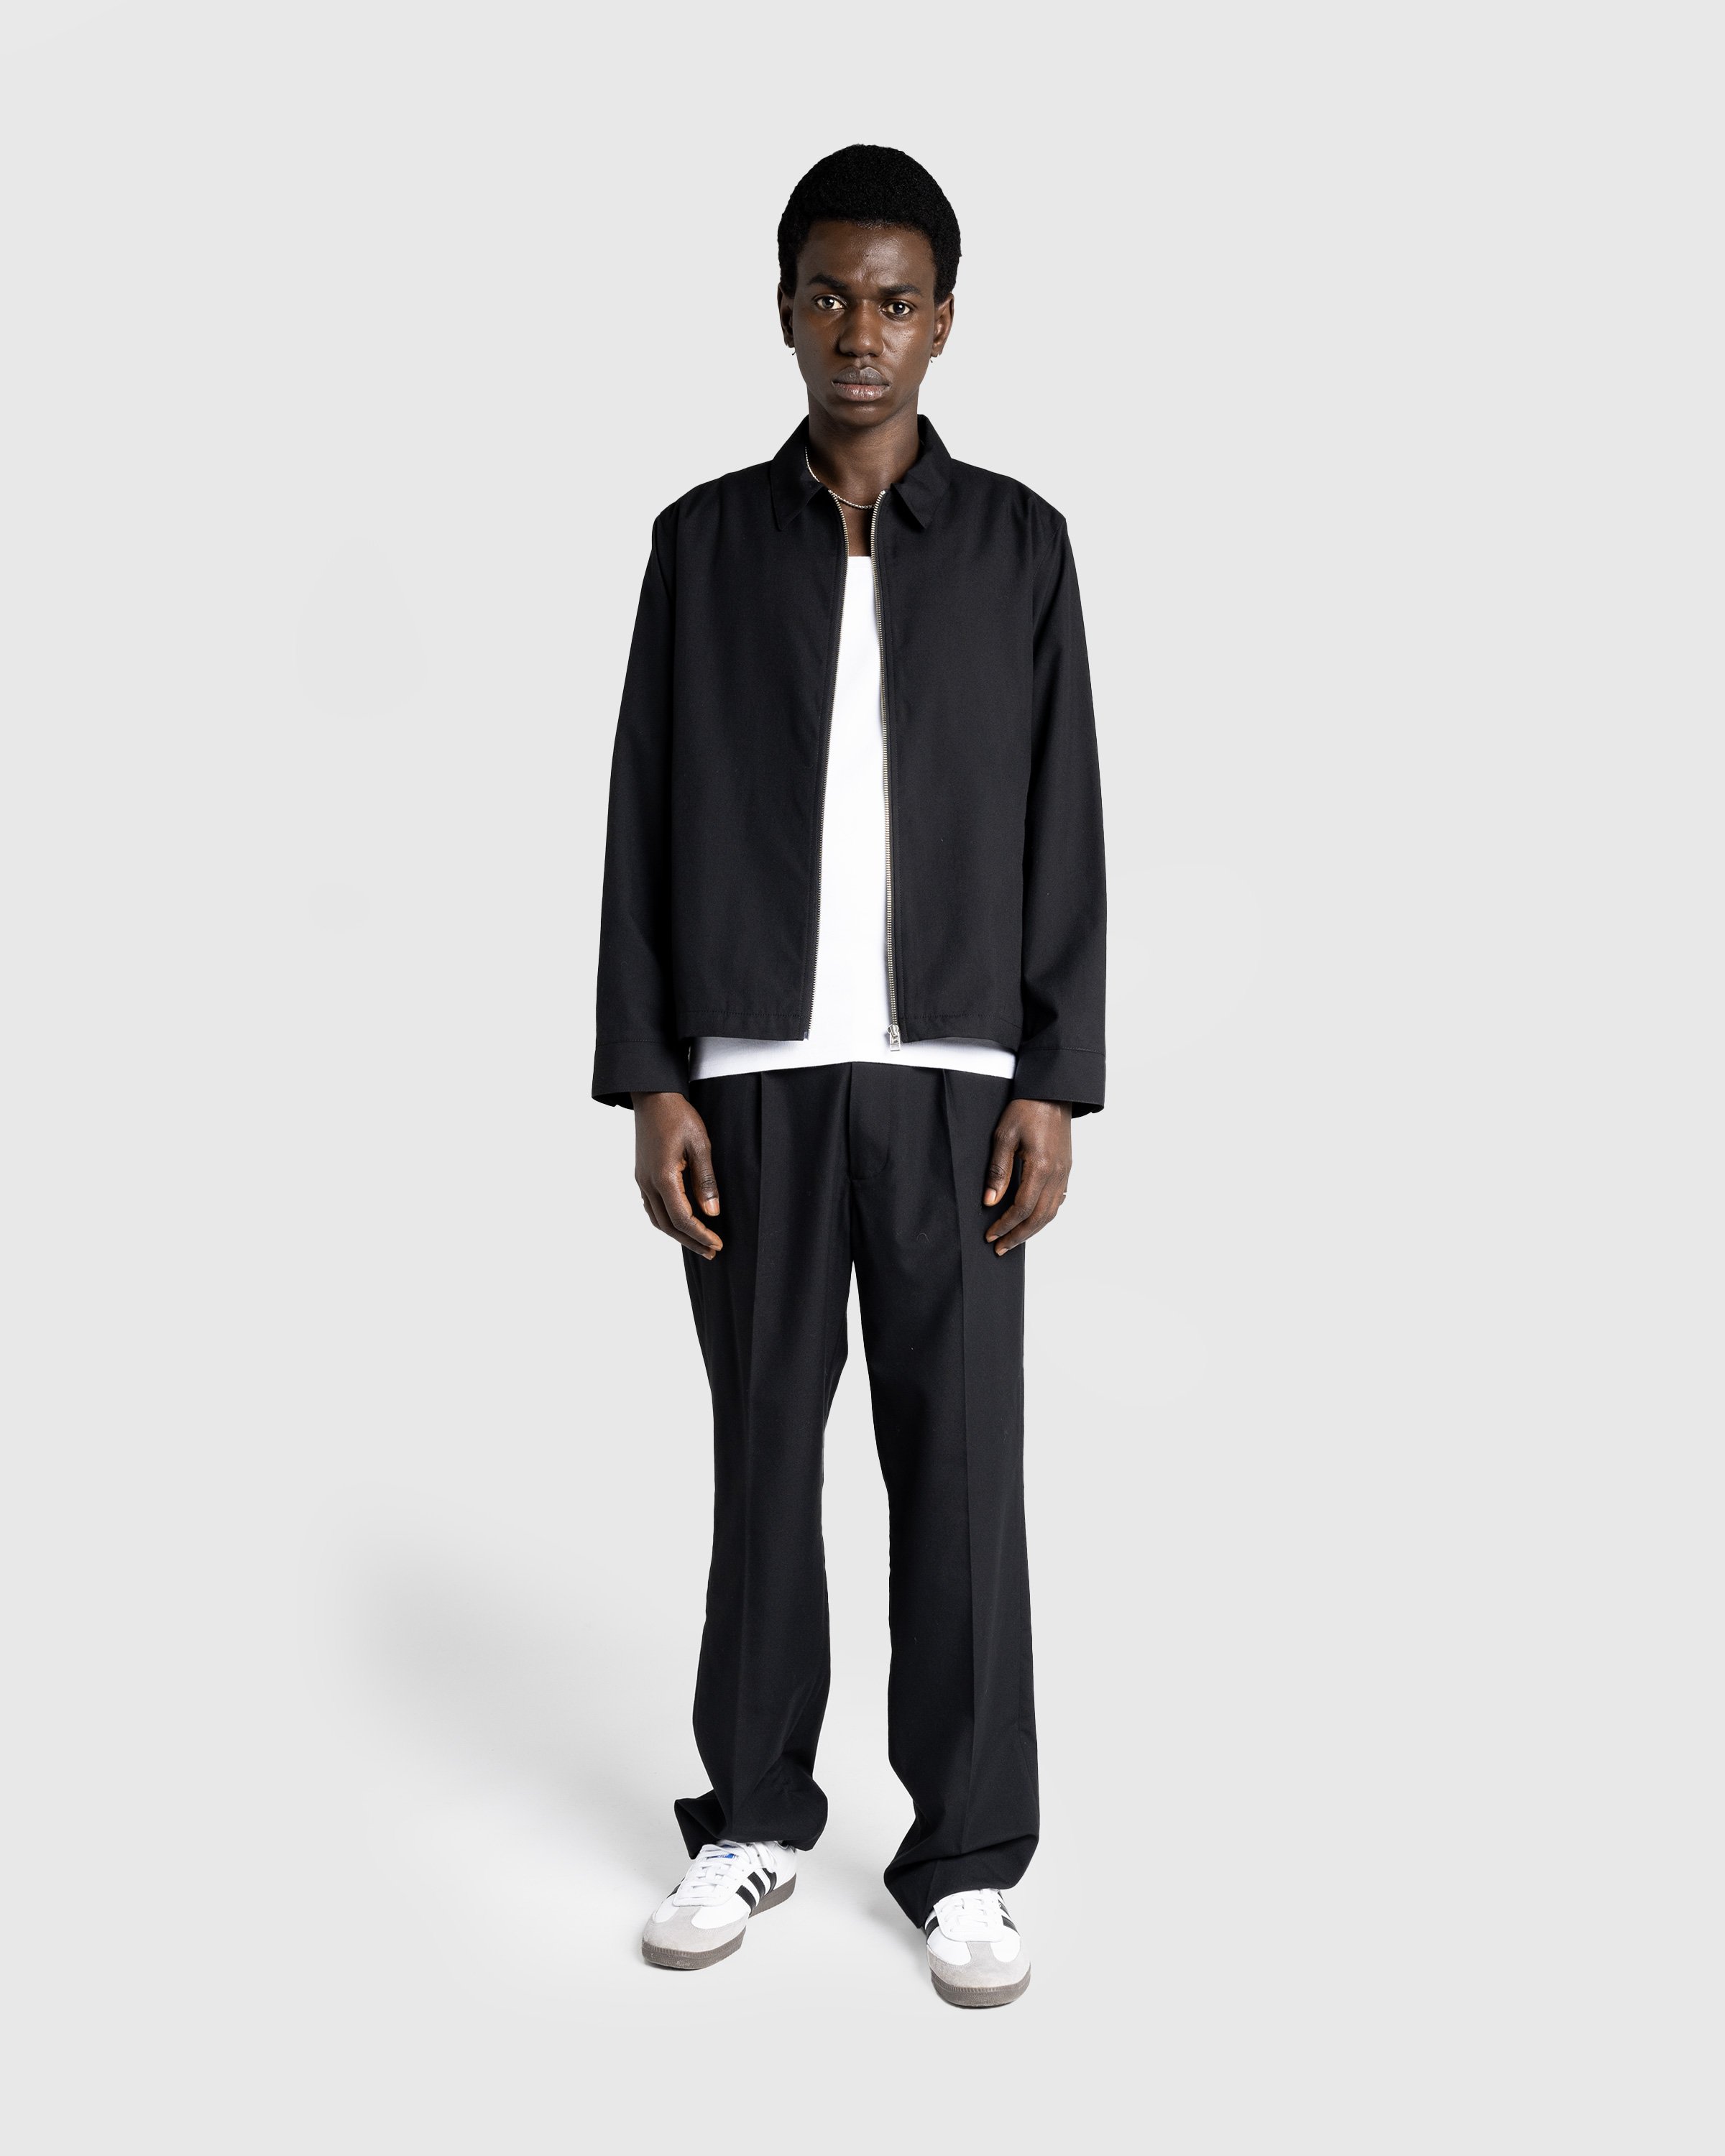 Highsnobiety HS05 - Tropical Suiting Pants - Clothing - Black - Image 4